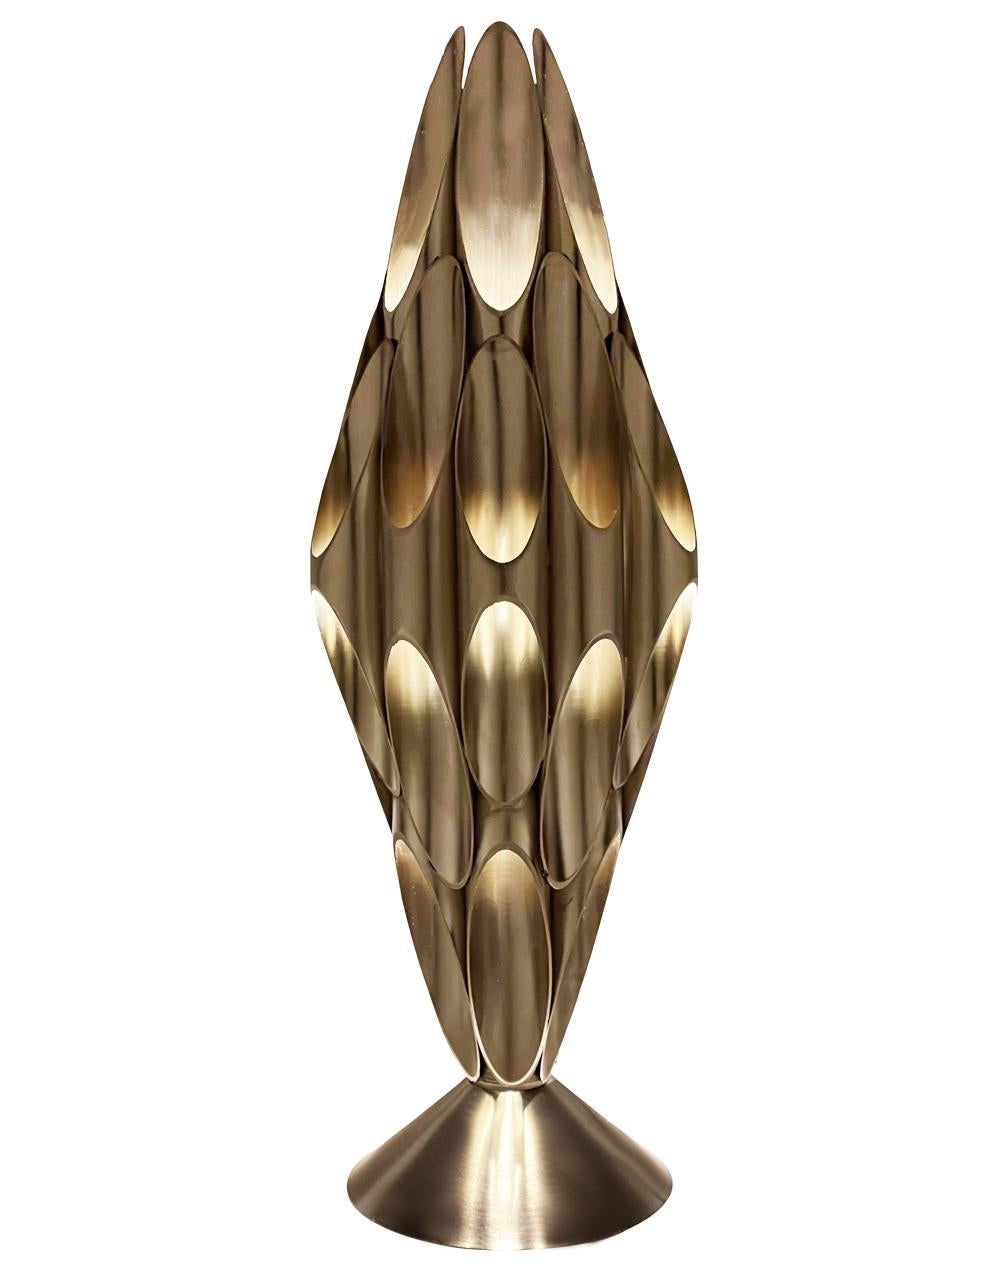 American Mid-Century Modern Tubular Table Sculpture Lamp in Solid Chrome After Rougier For Sale